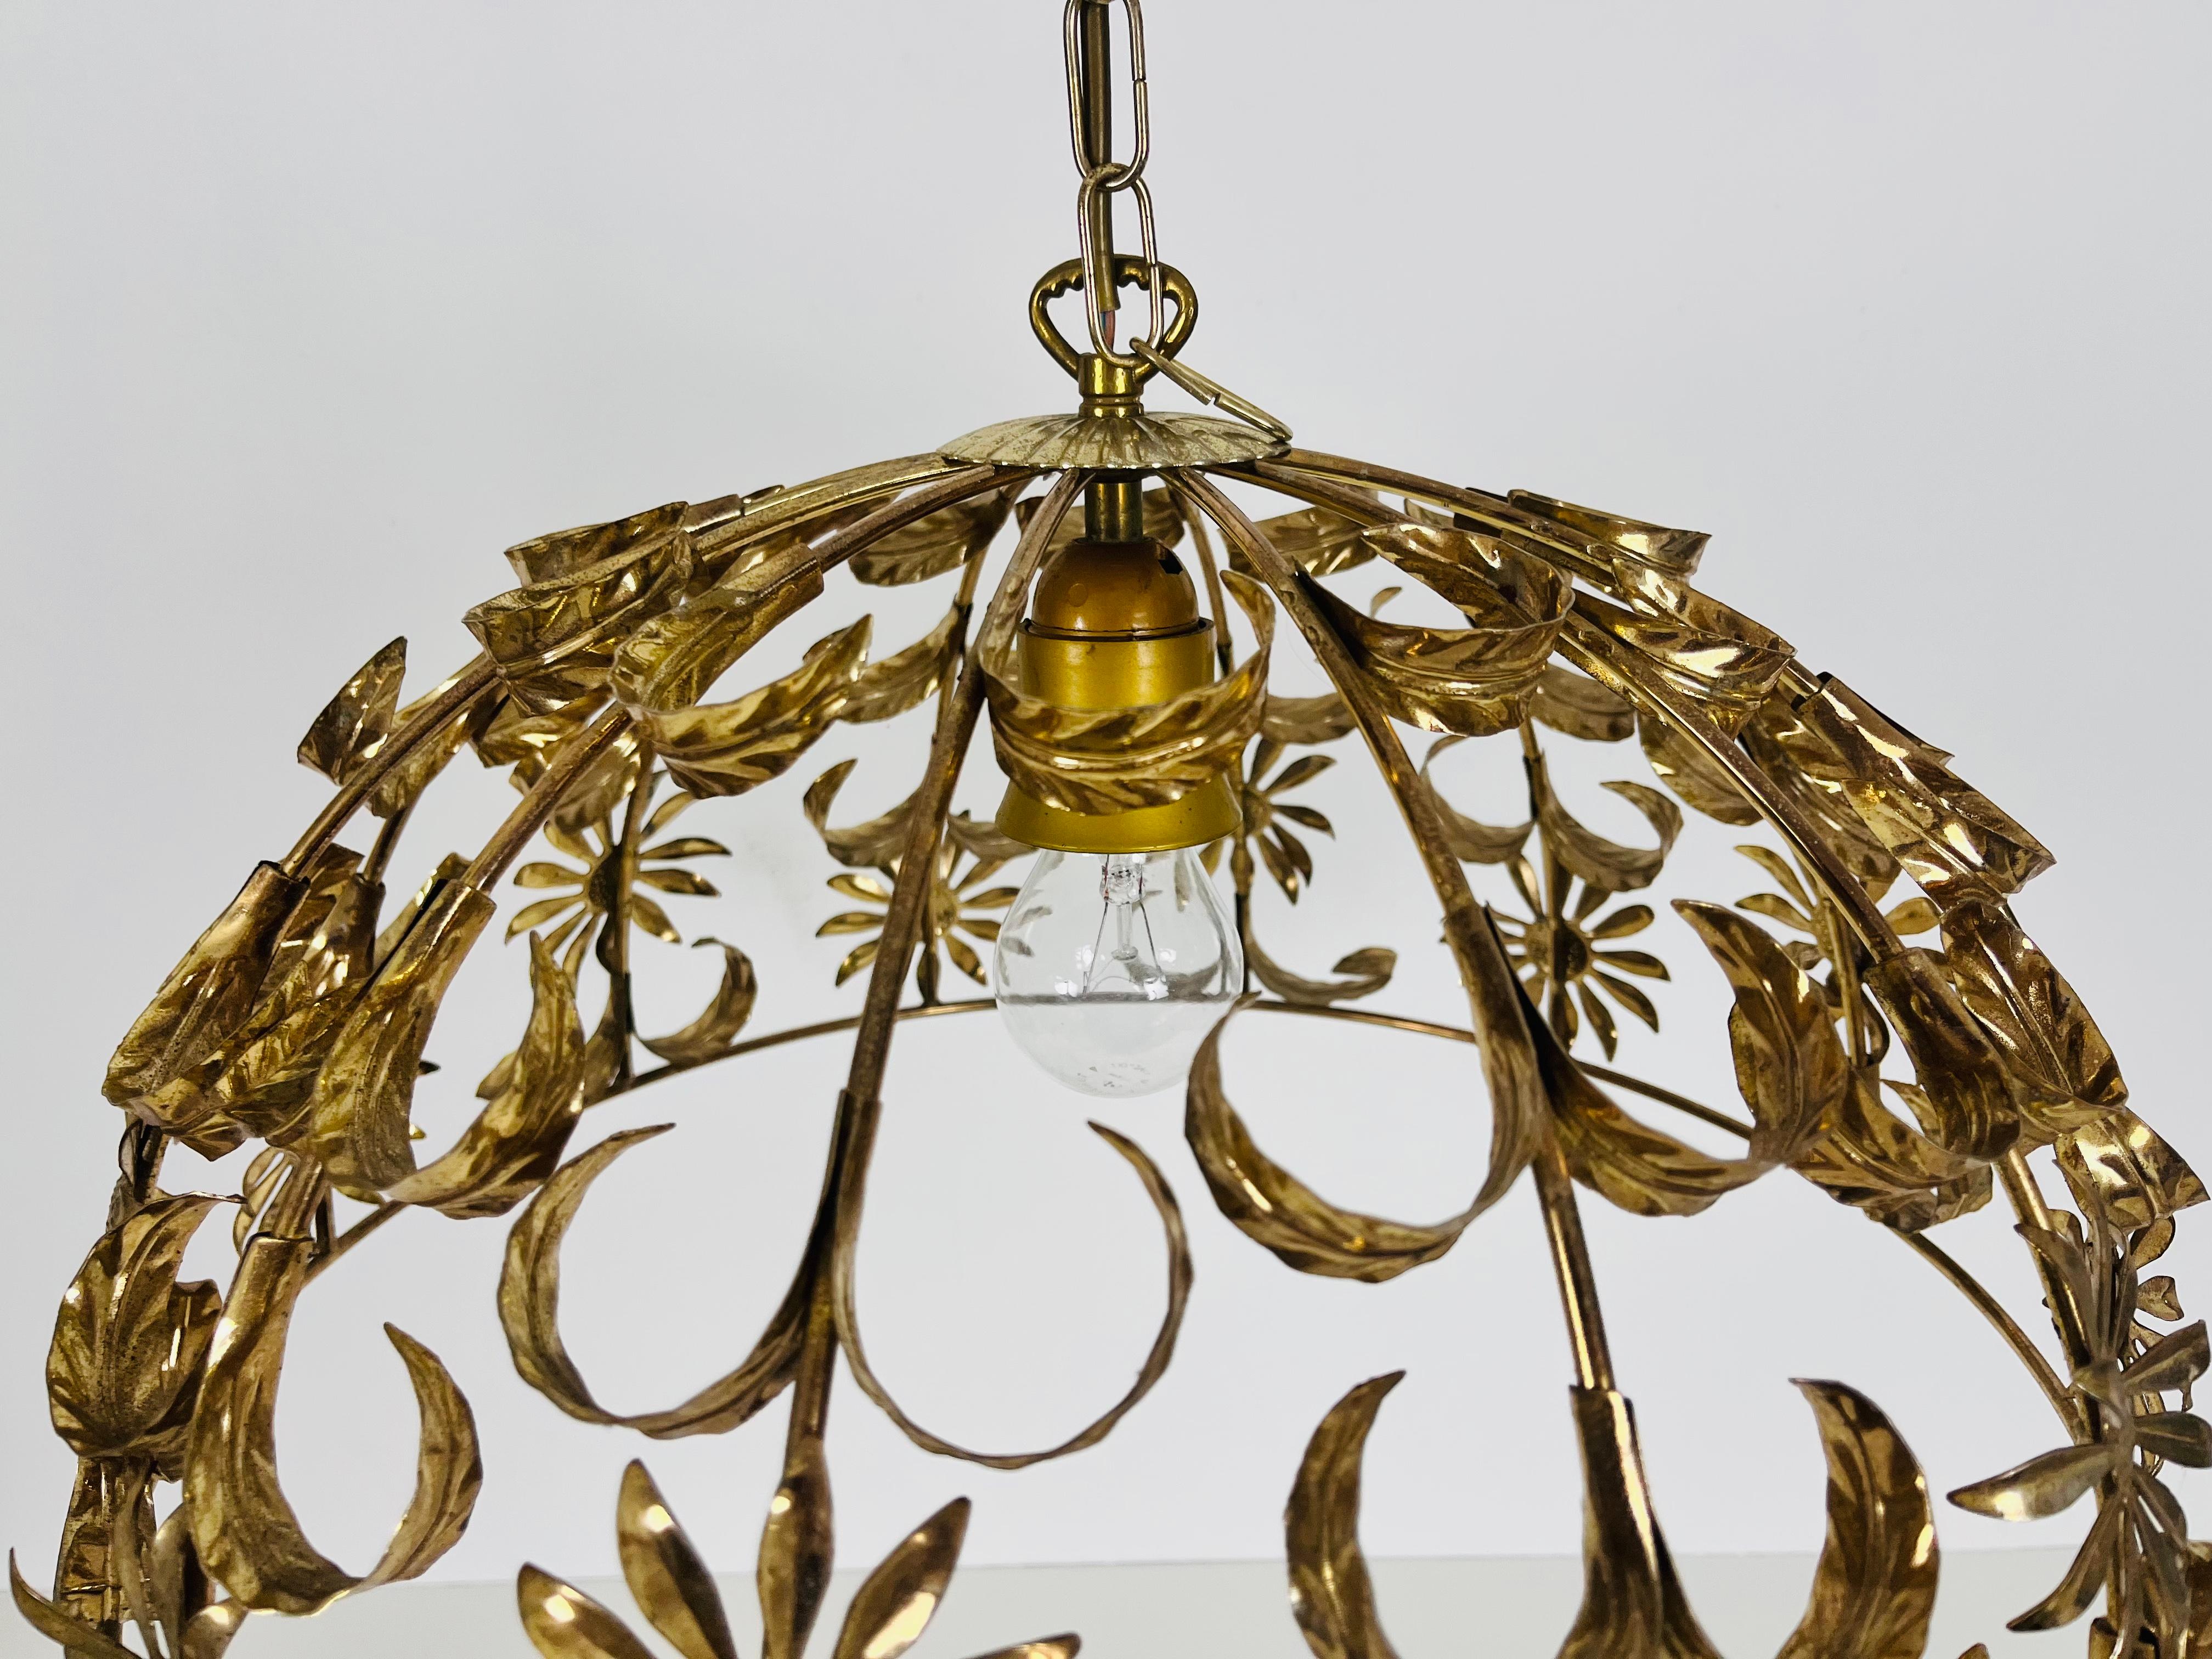 Hand-Crafted Florentine Flower Shape Pendant Lamp Attributed to Banci Firenze, 1970s For Sale